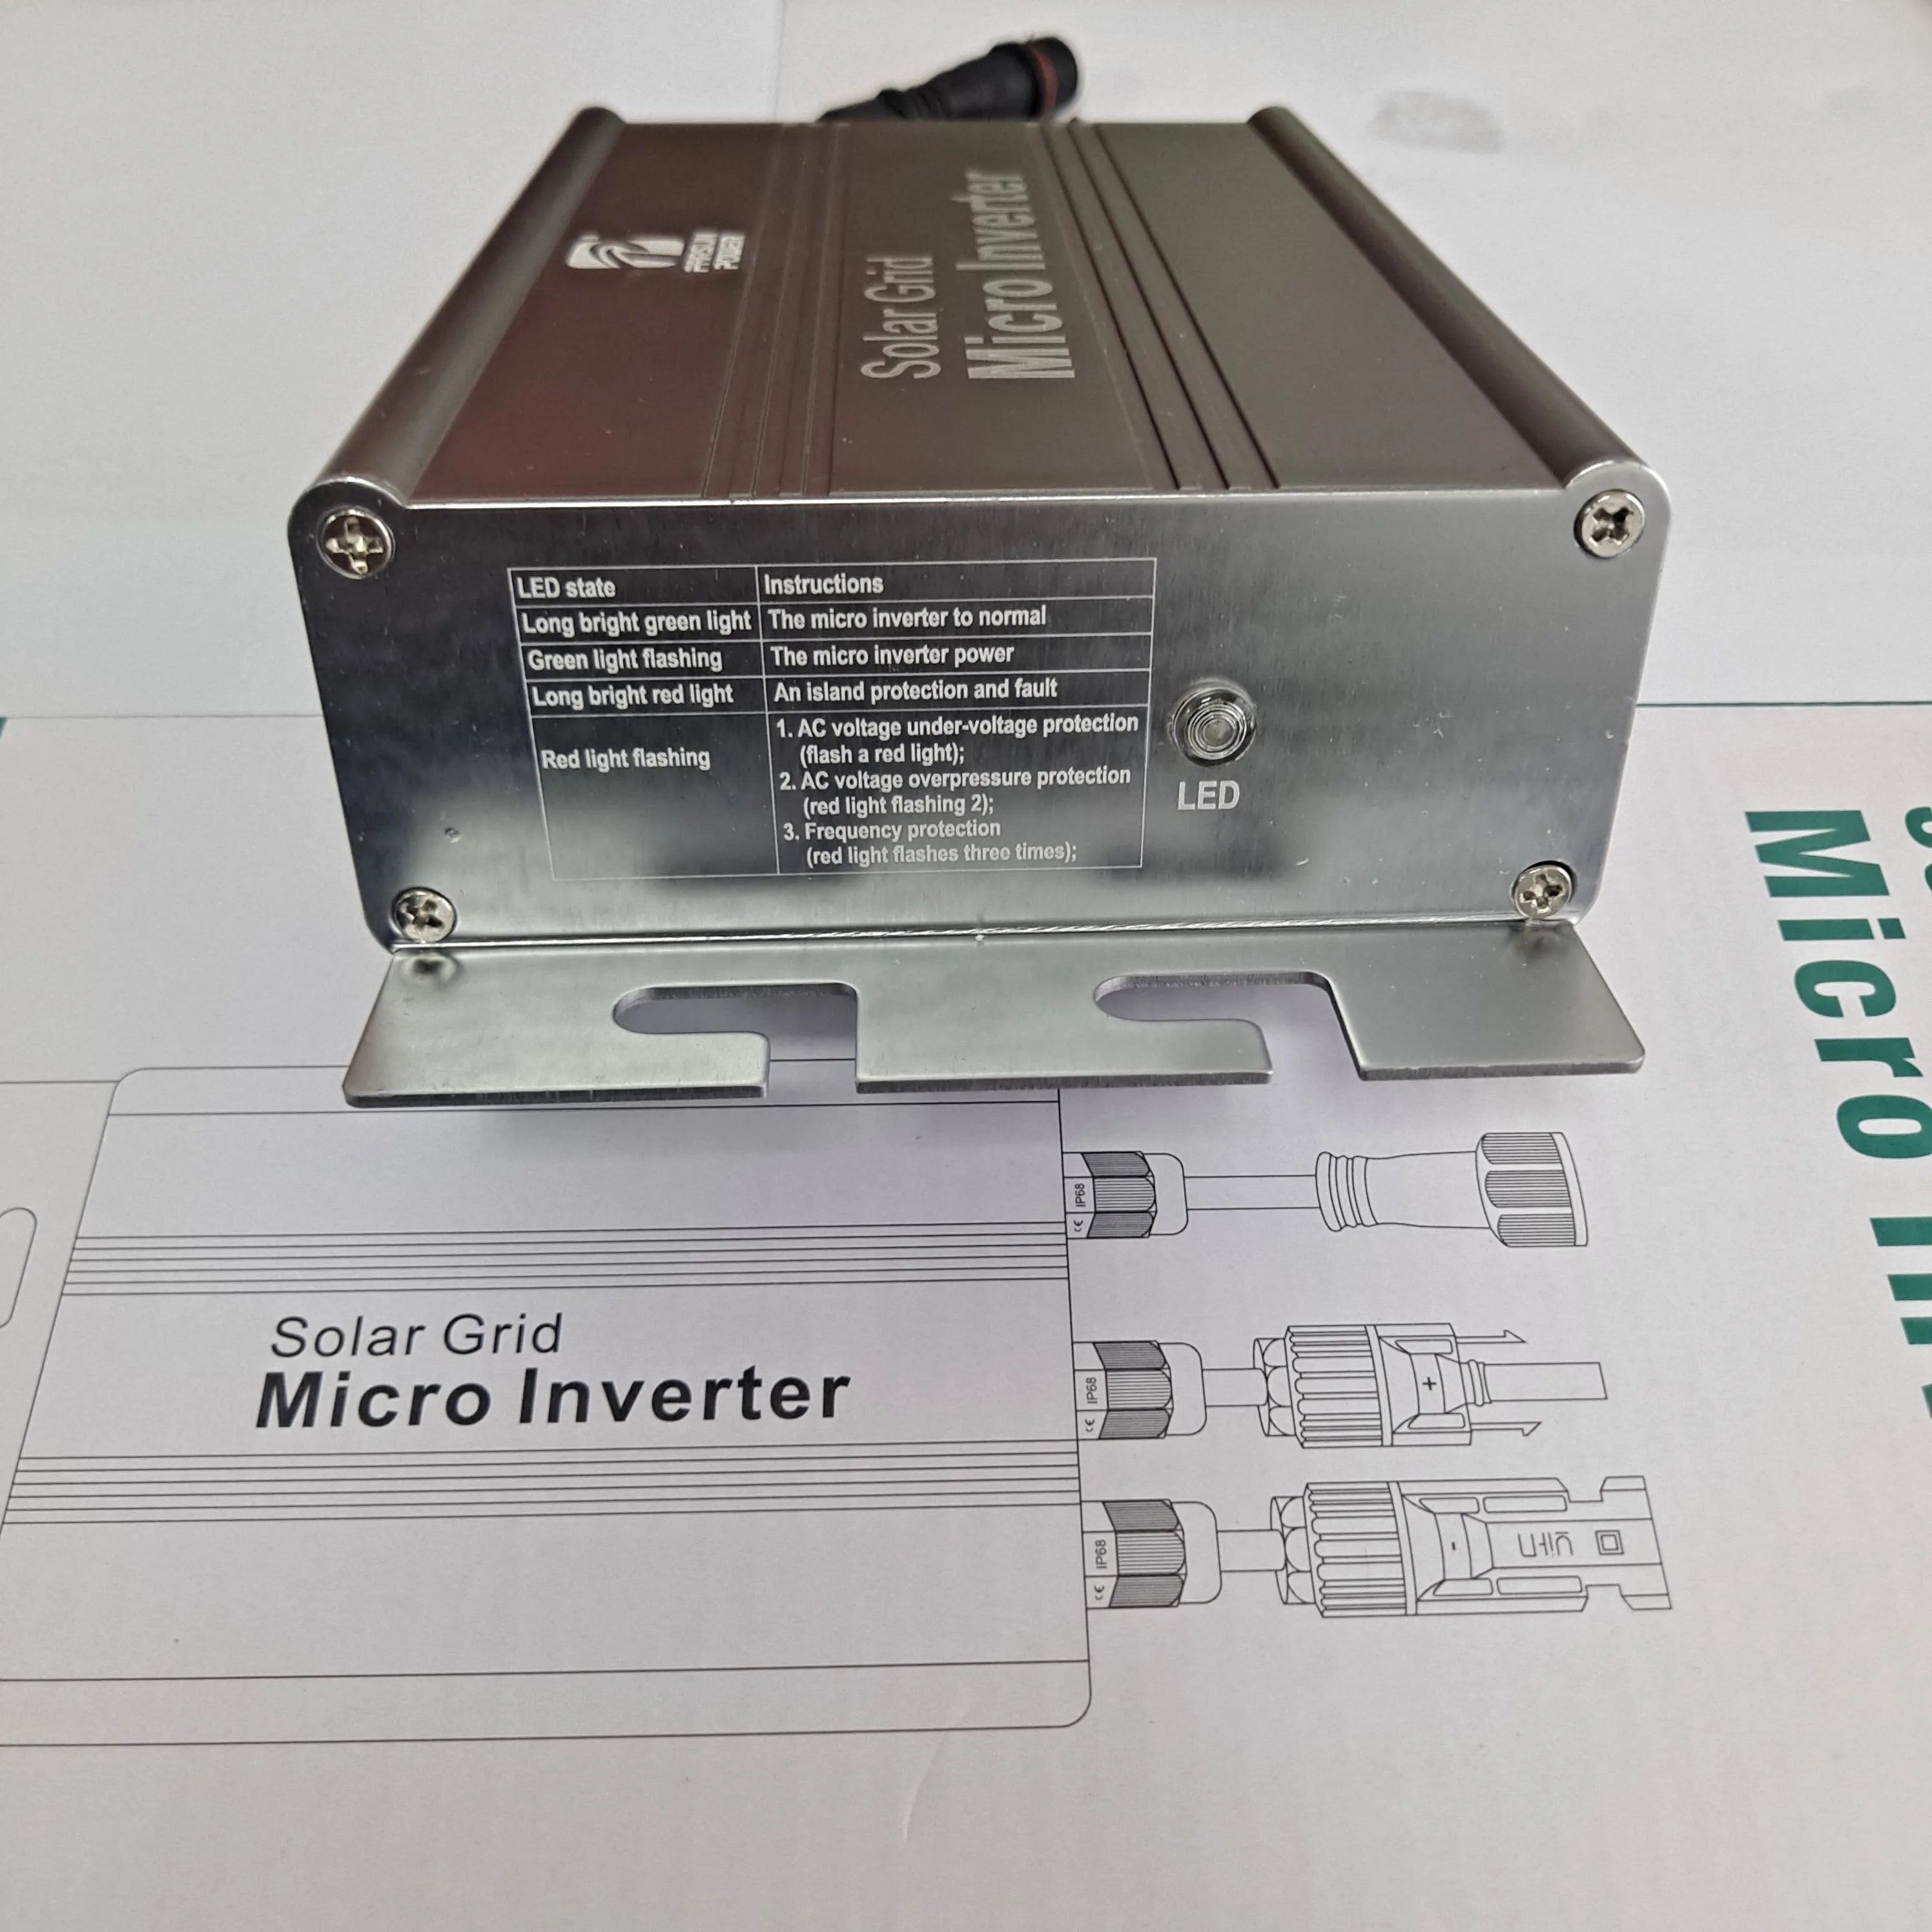 MPPT Solar Grid Tie Micro Inverter, LED indicators display system status with colors and flashes for normal operation, faults, and warnings.